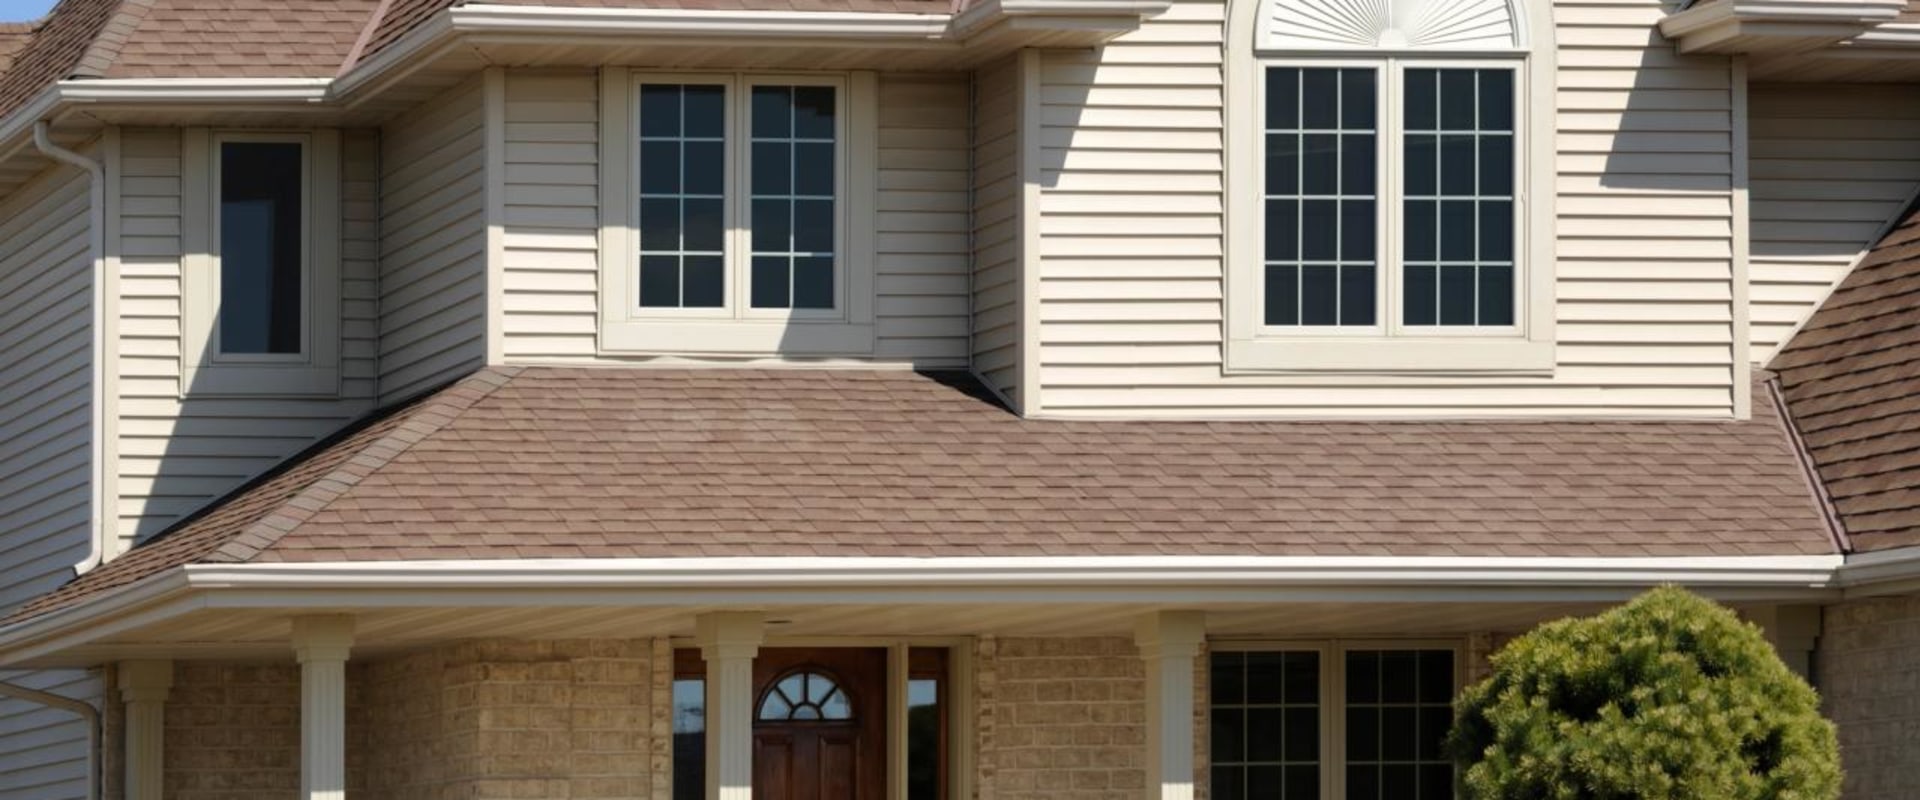 What is the most popular roofing?